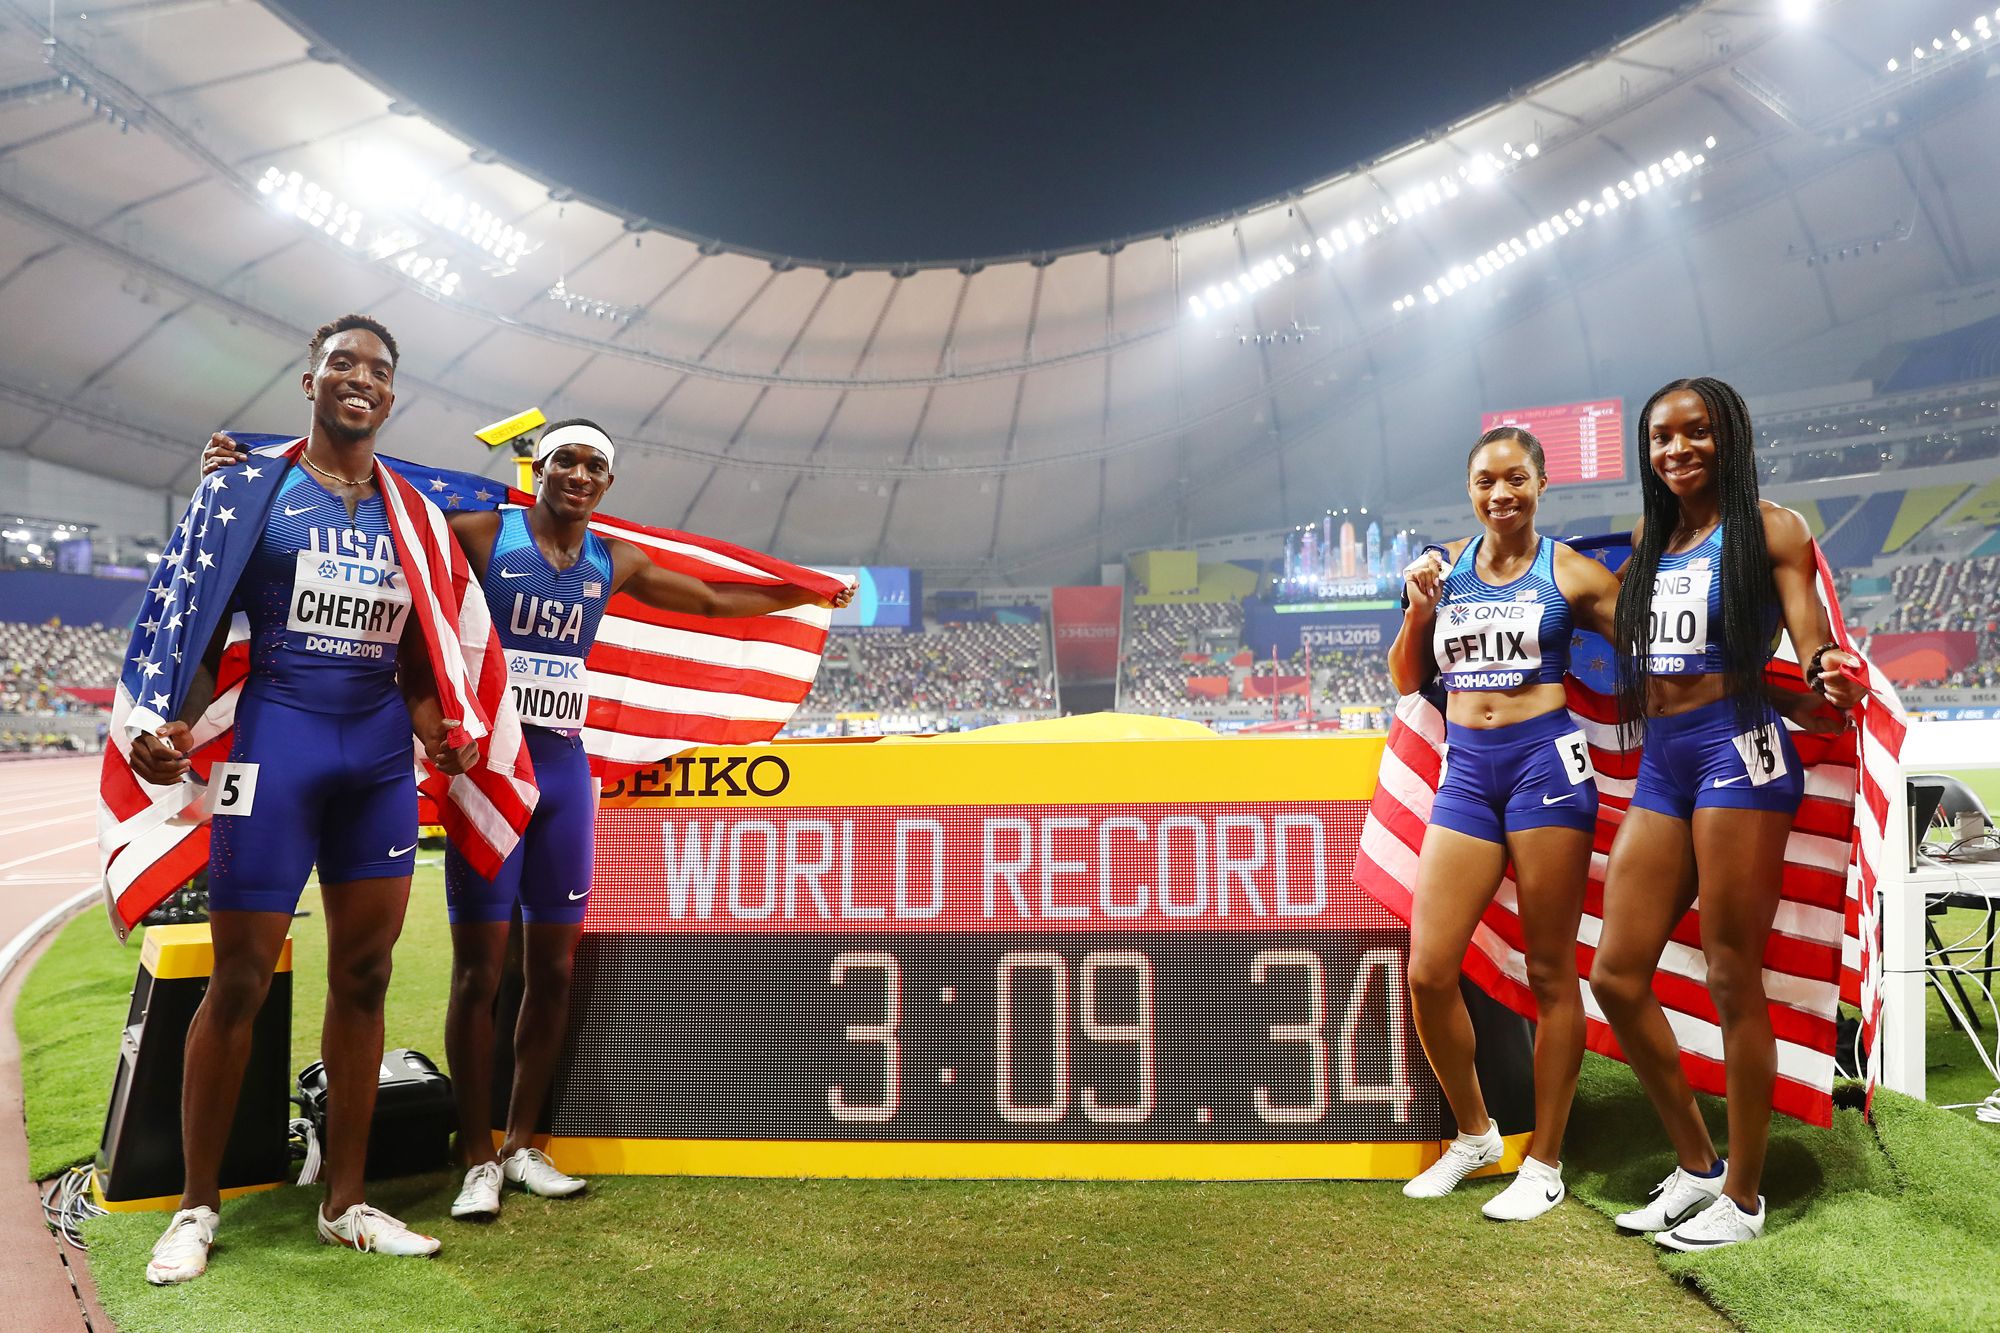 USA quartet wins the mixed 4x400m relay in a world record time at the World Athletics Championships Doha 2019